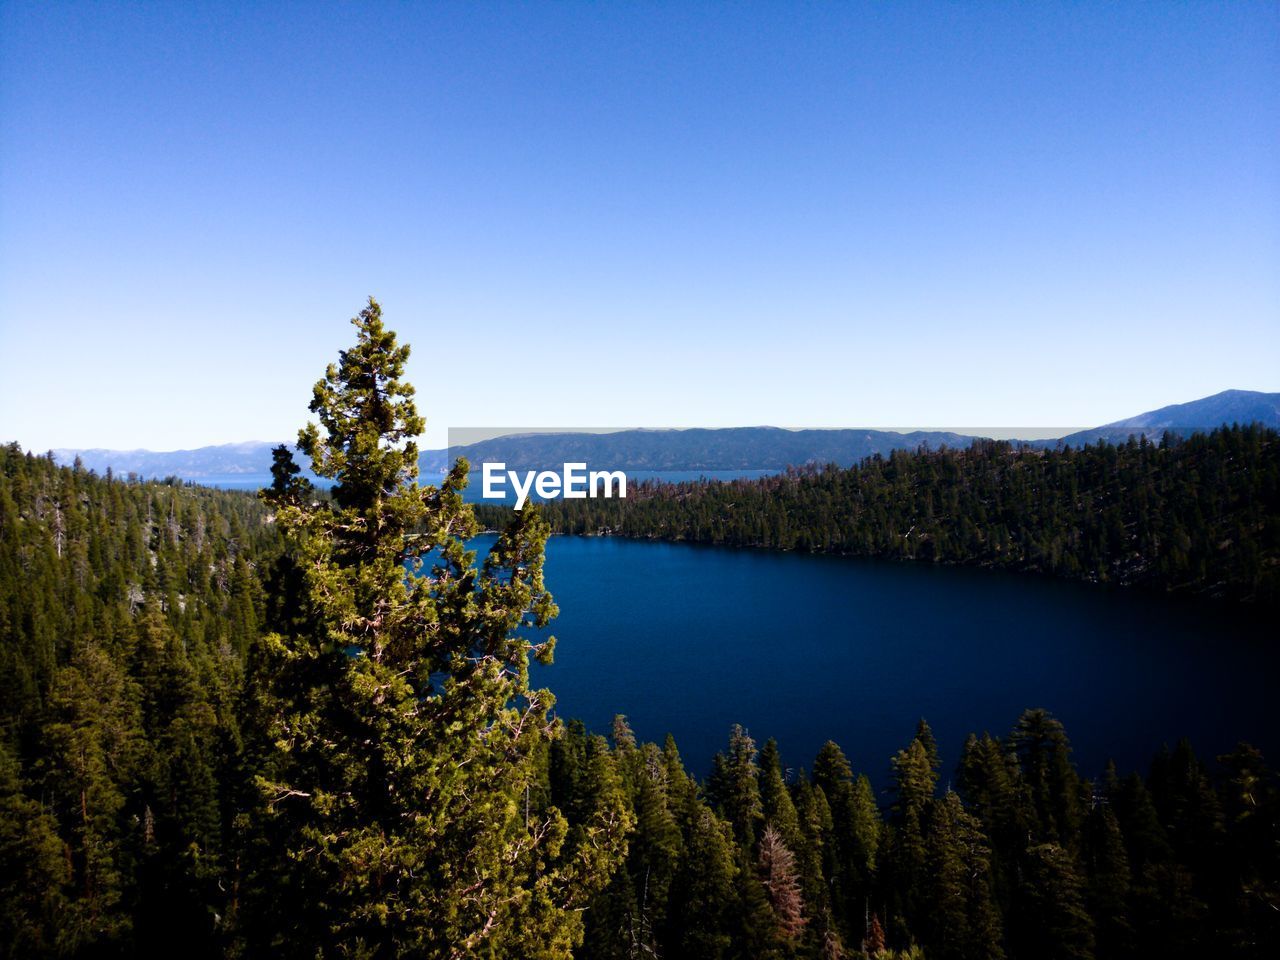 SCENIC VIEW OF LAKE AND TREES AGAINST CLEAR BLUE SKY